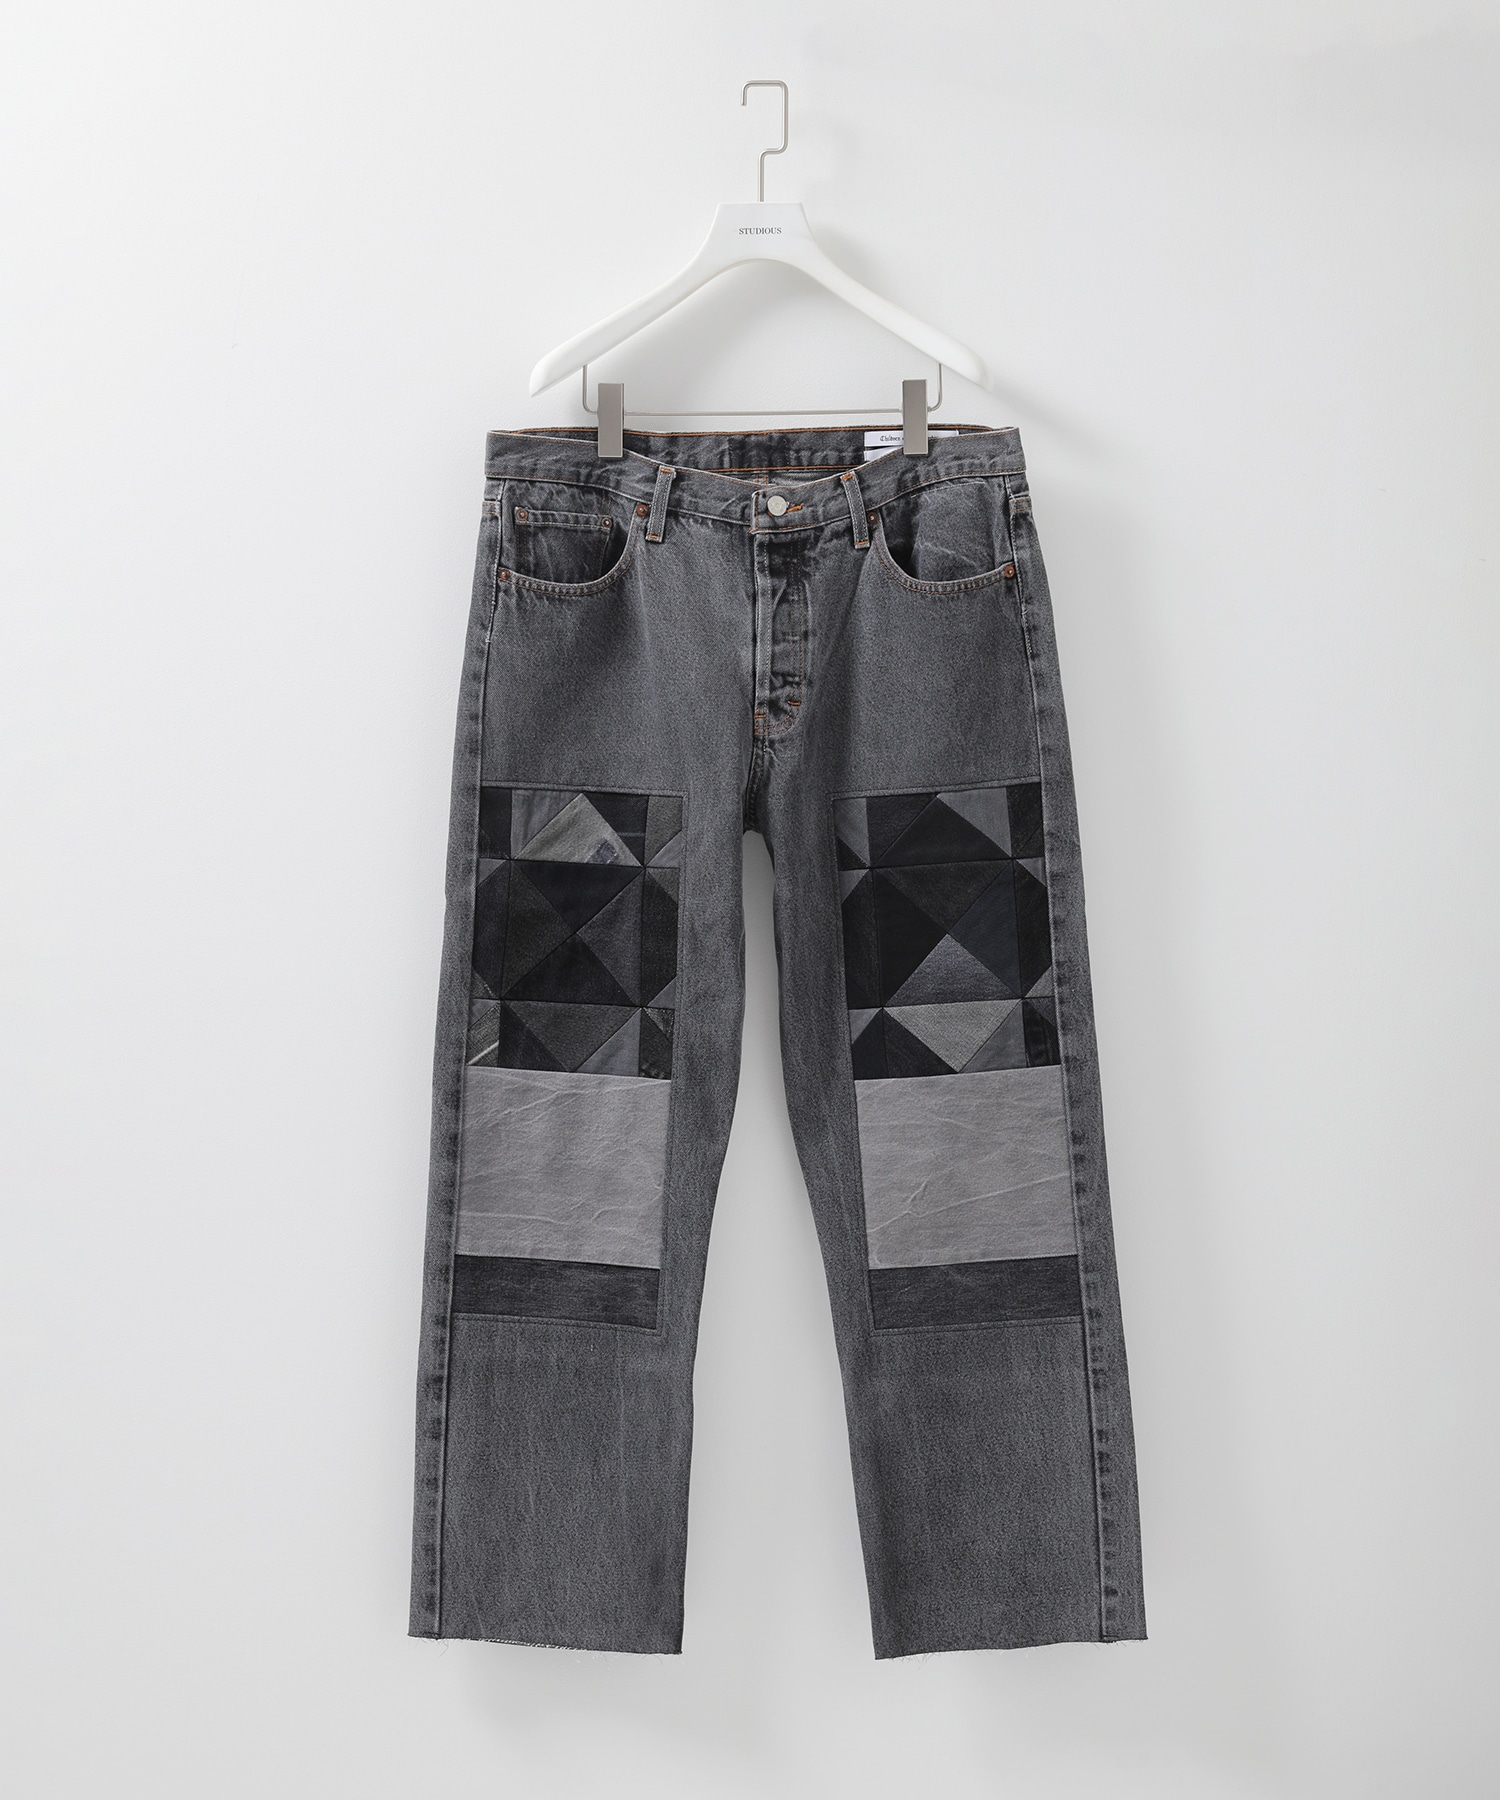 NY: OLD PATCH DENIM PANTS TYPE-501 | Children of the discordance